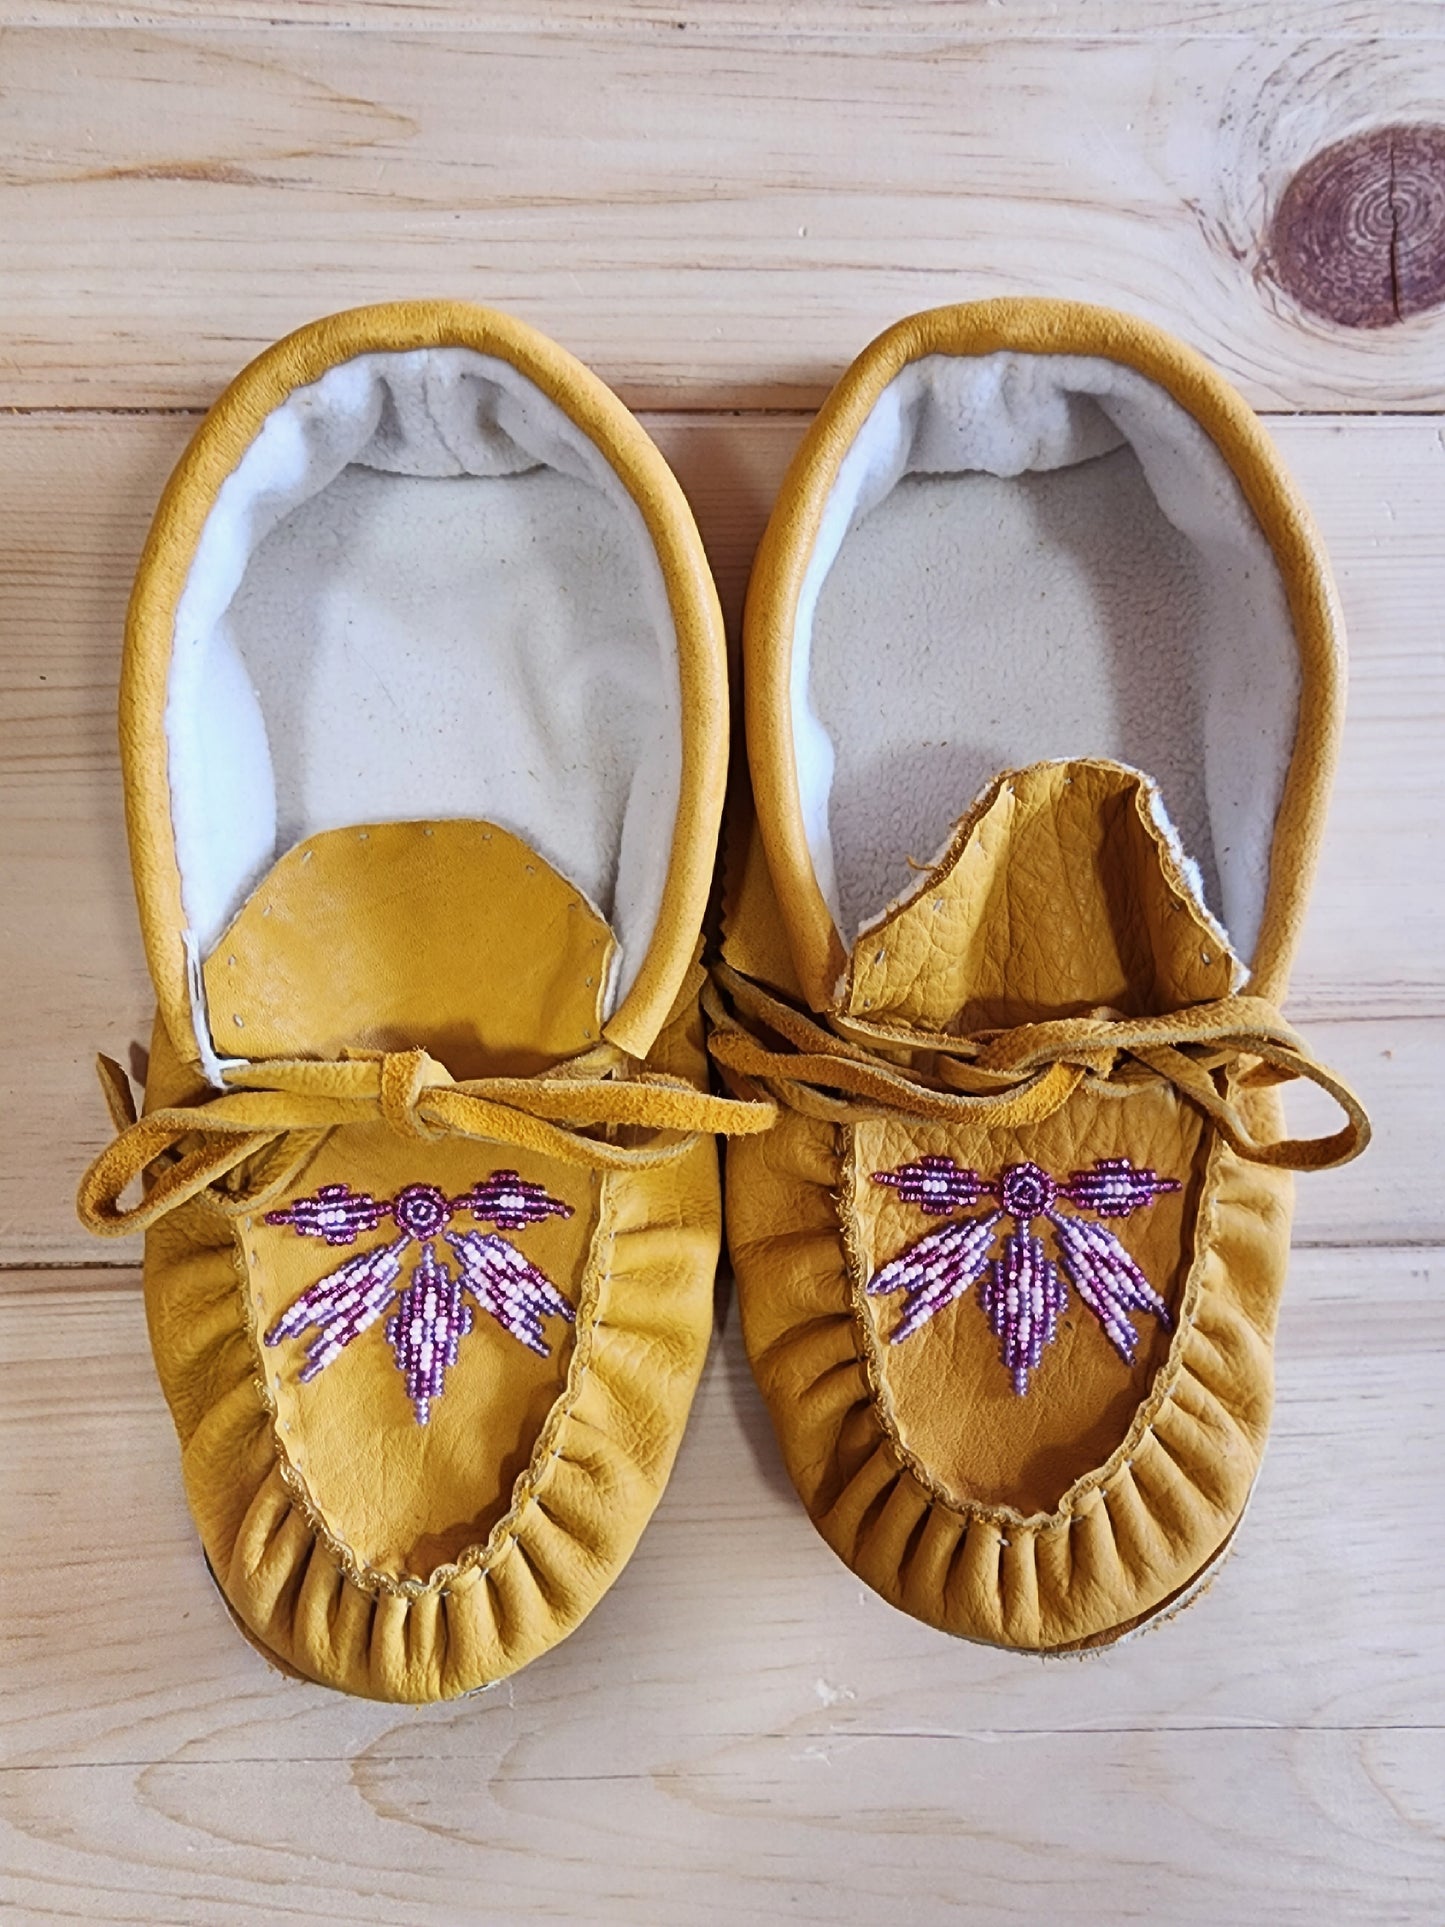 Leather Moccasins - Size 9.5 (U.S.) - with Beaded Design